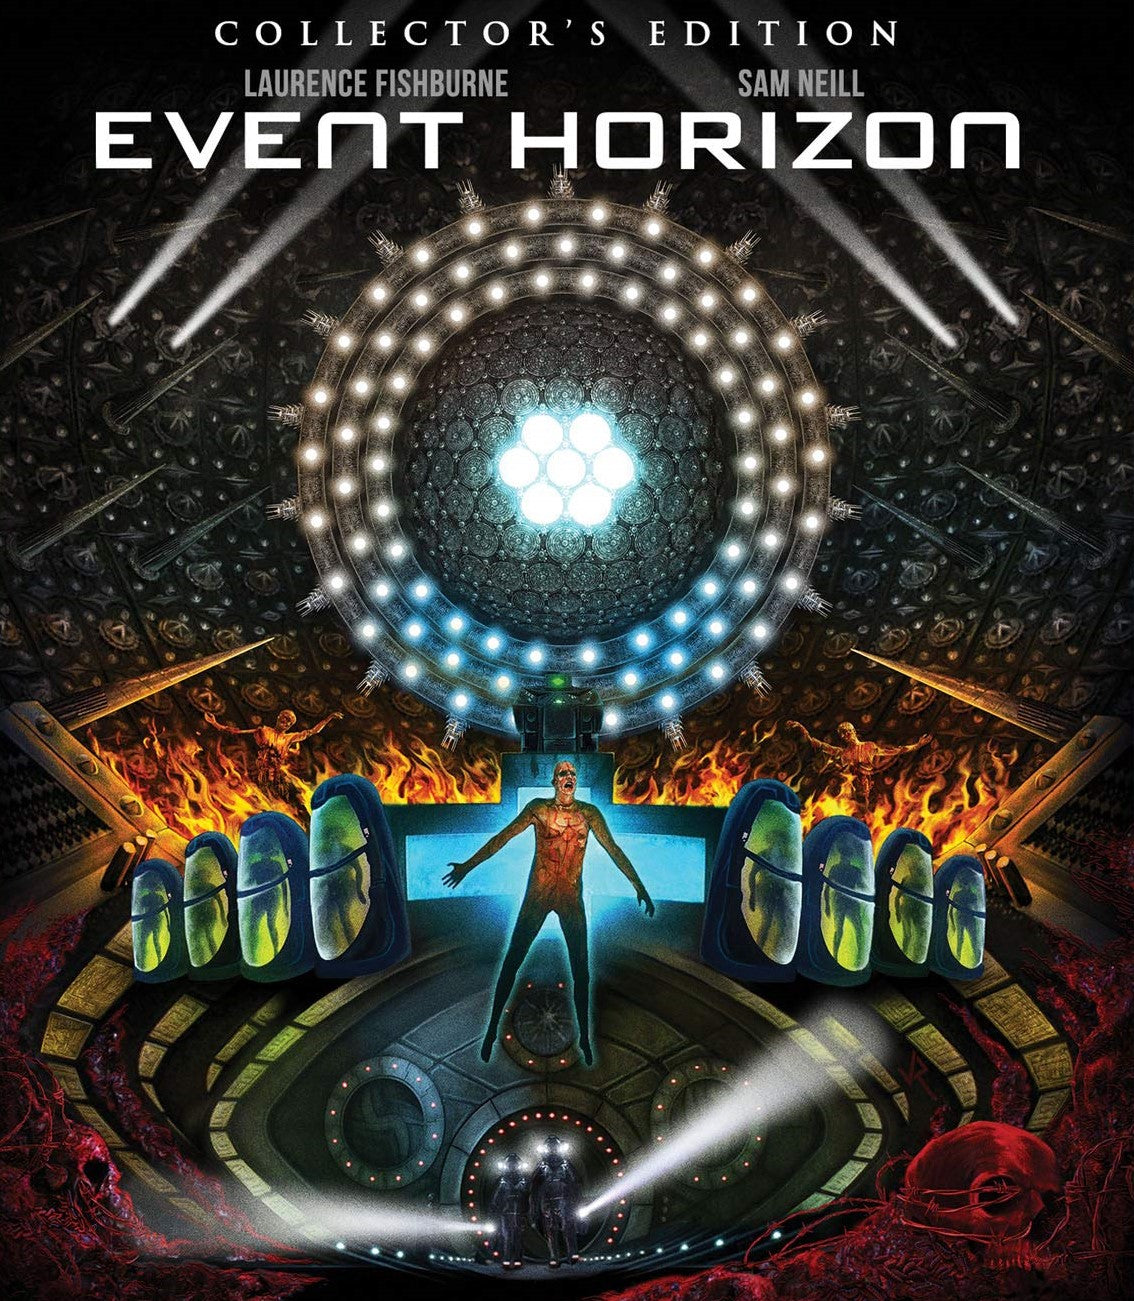 EVENT HORIZON (COLLECTOR'S EDITION) BLU-RAY